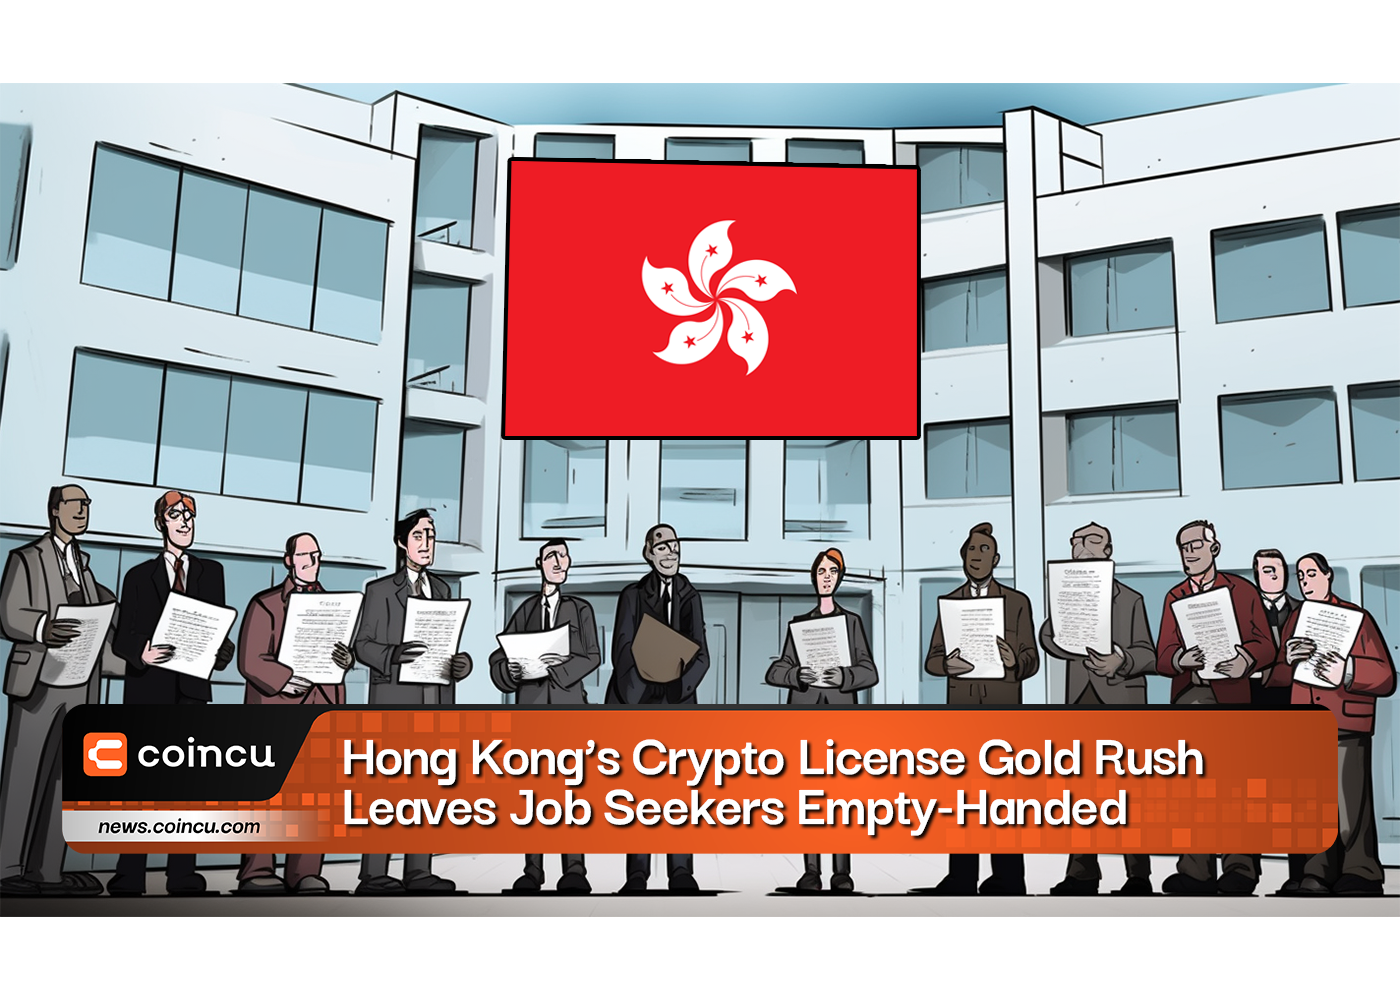 Hong Kongs Crypto License Gold Rush Leaves Job Seekers Empty Handed